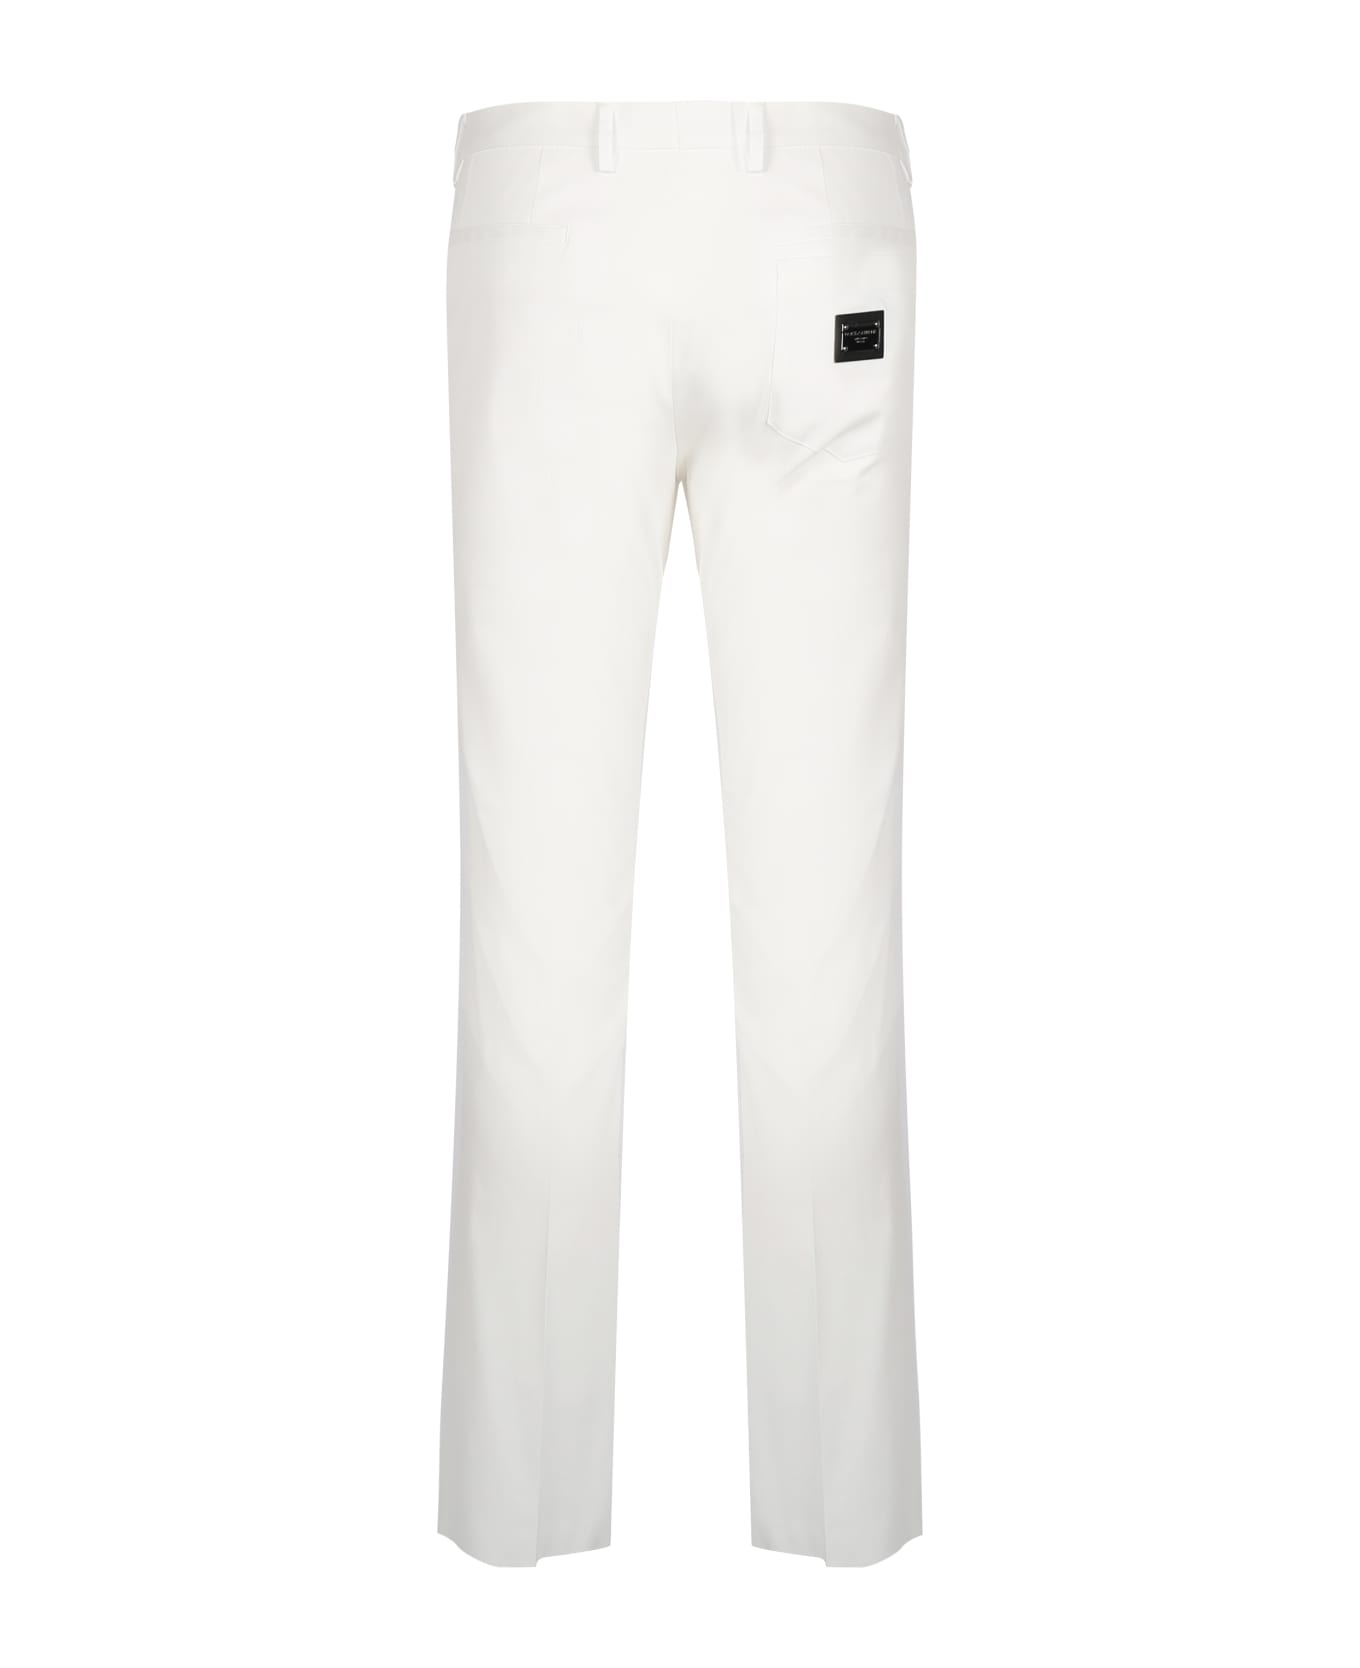 Dolce & Gabbana Stretch Cotton Trousers With Logoed Plaque - White